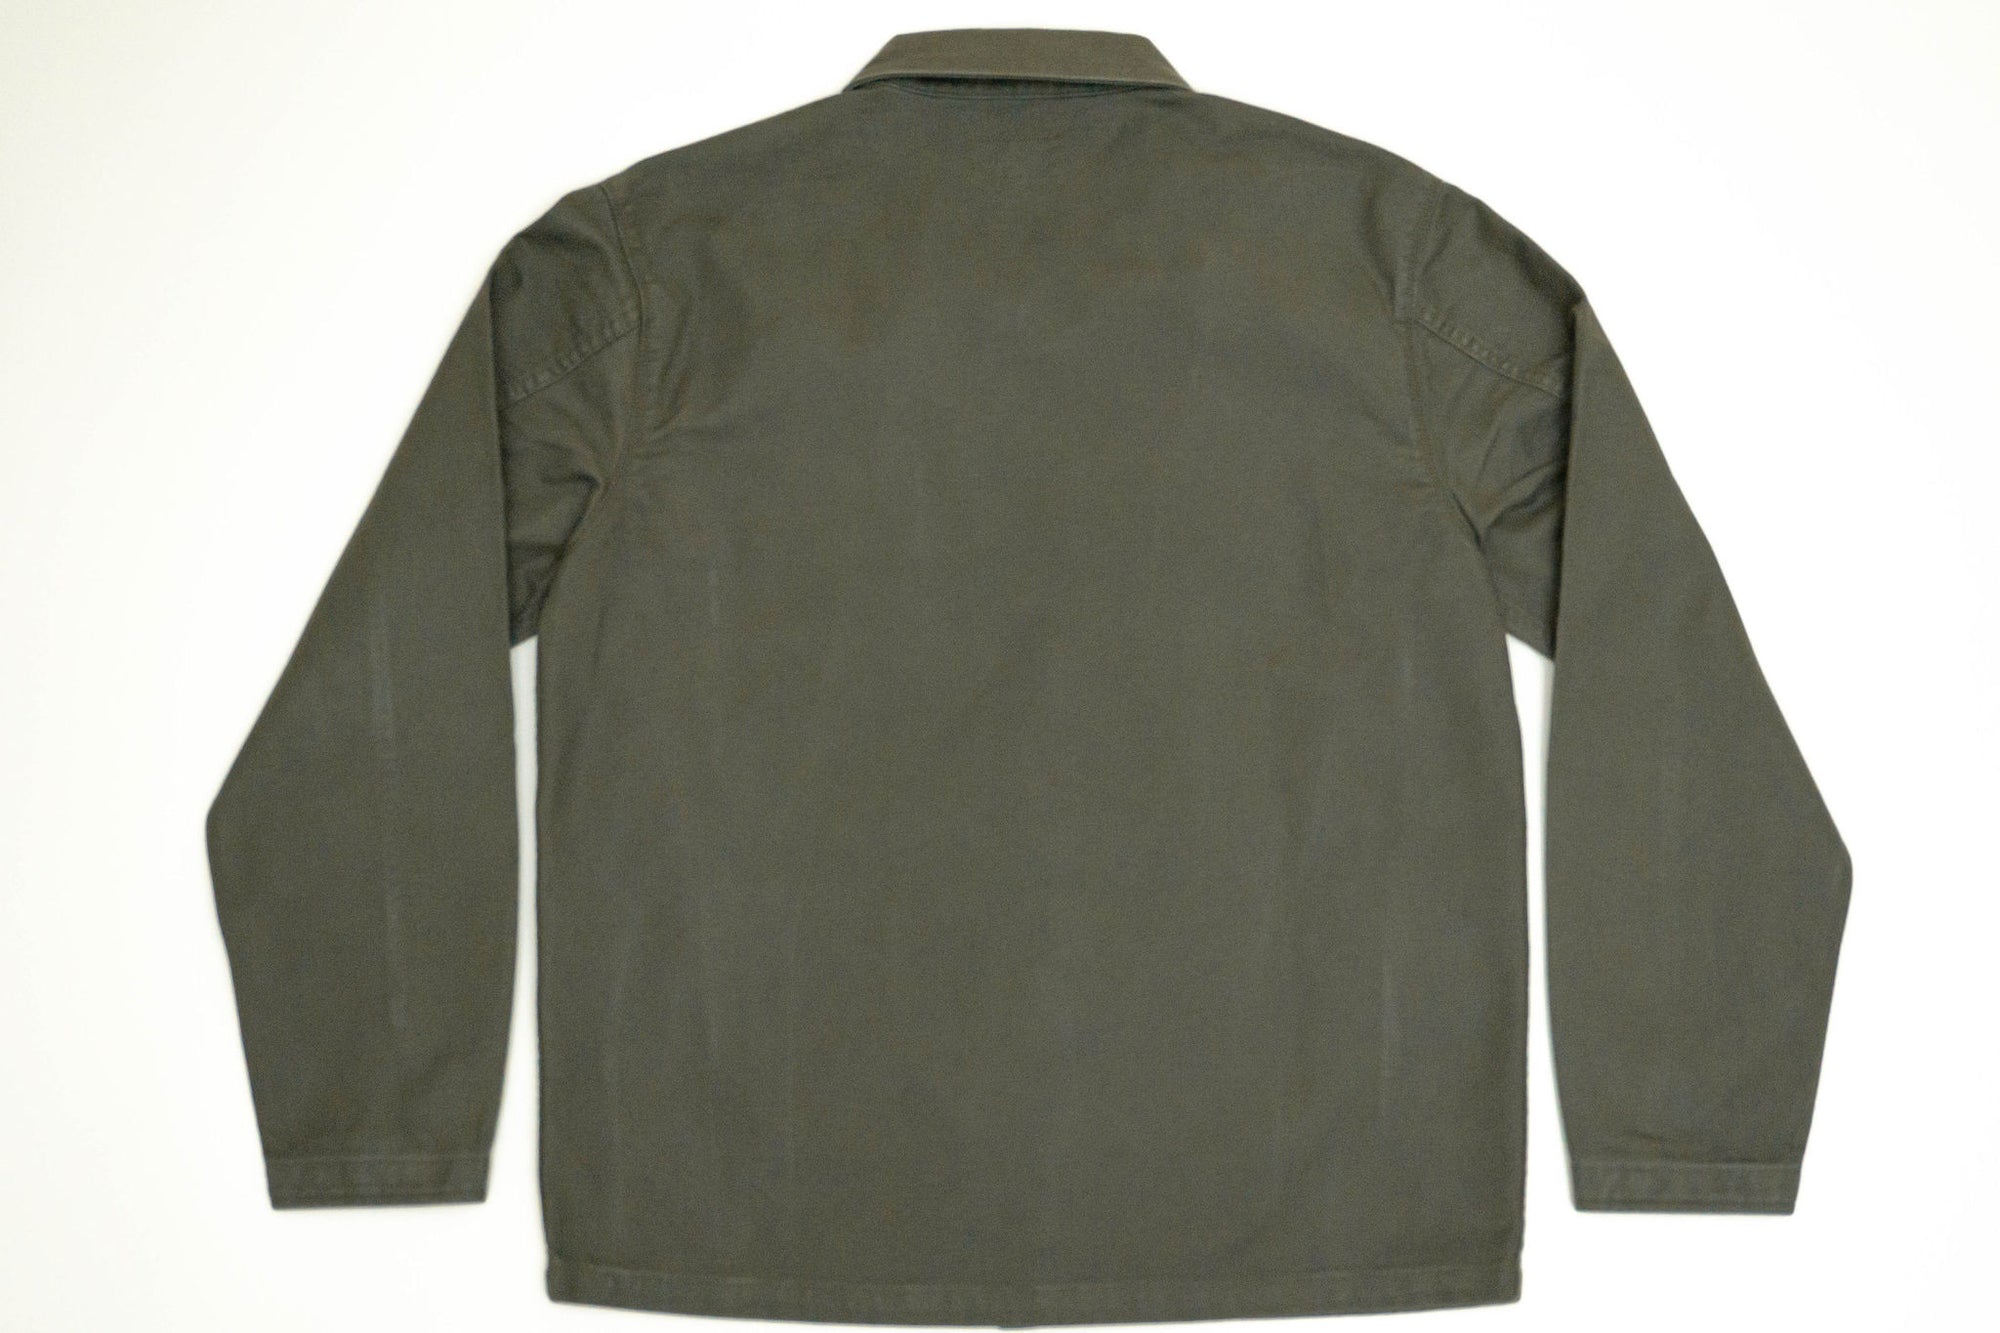 Freenote Cloth Midway - Olive